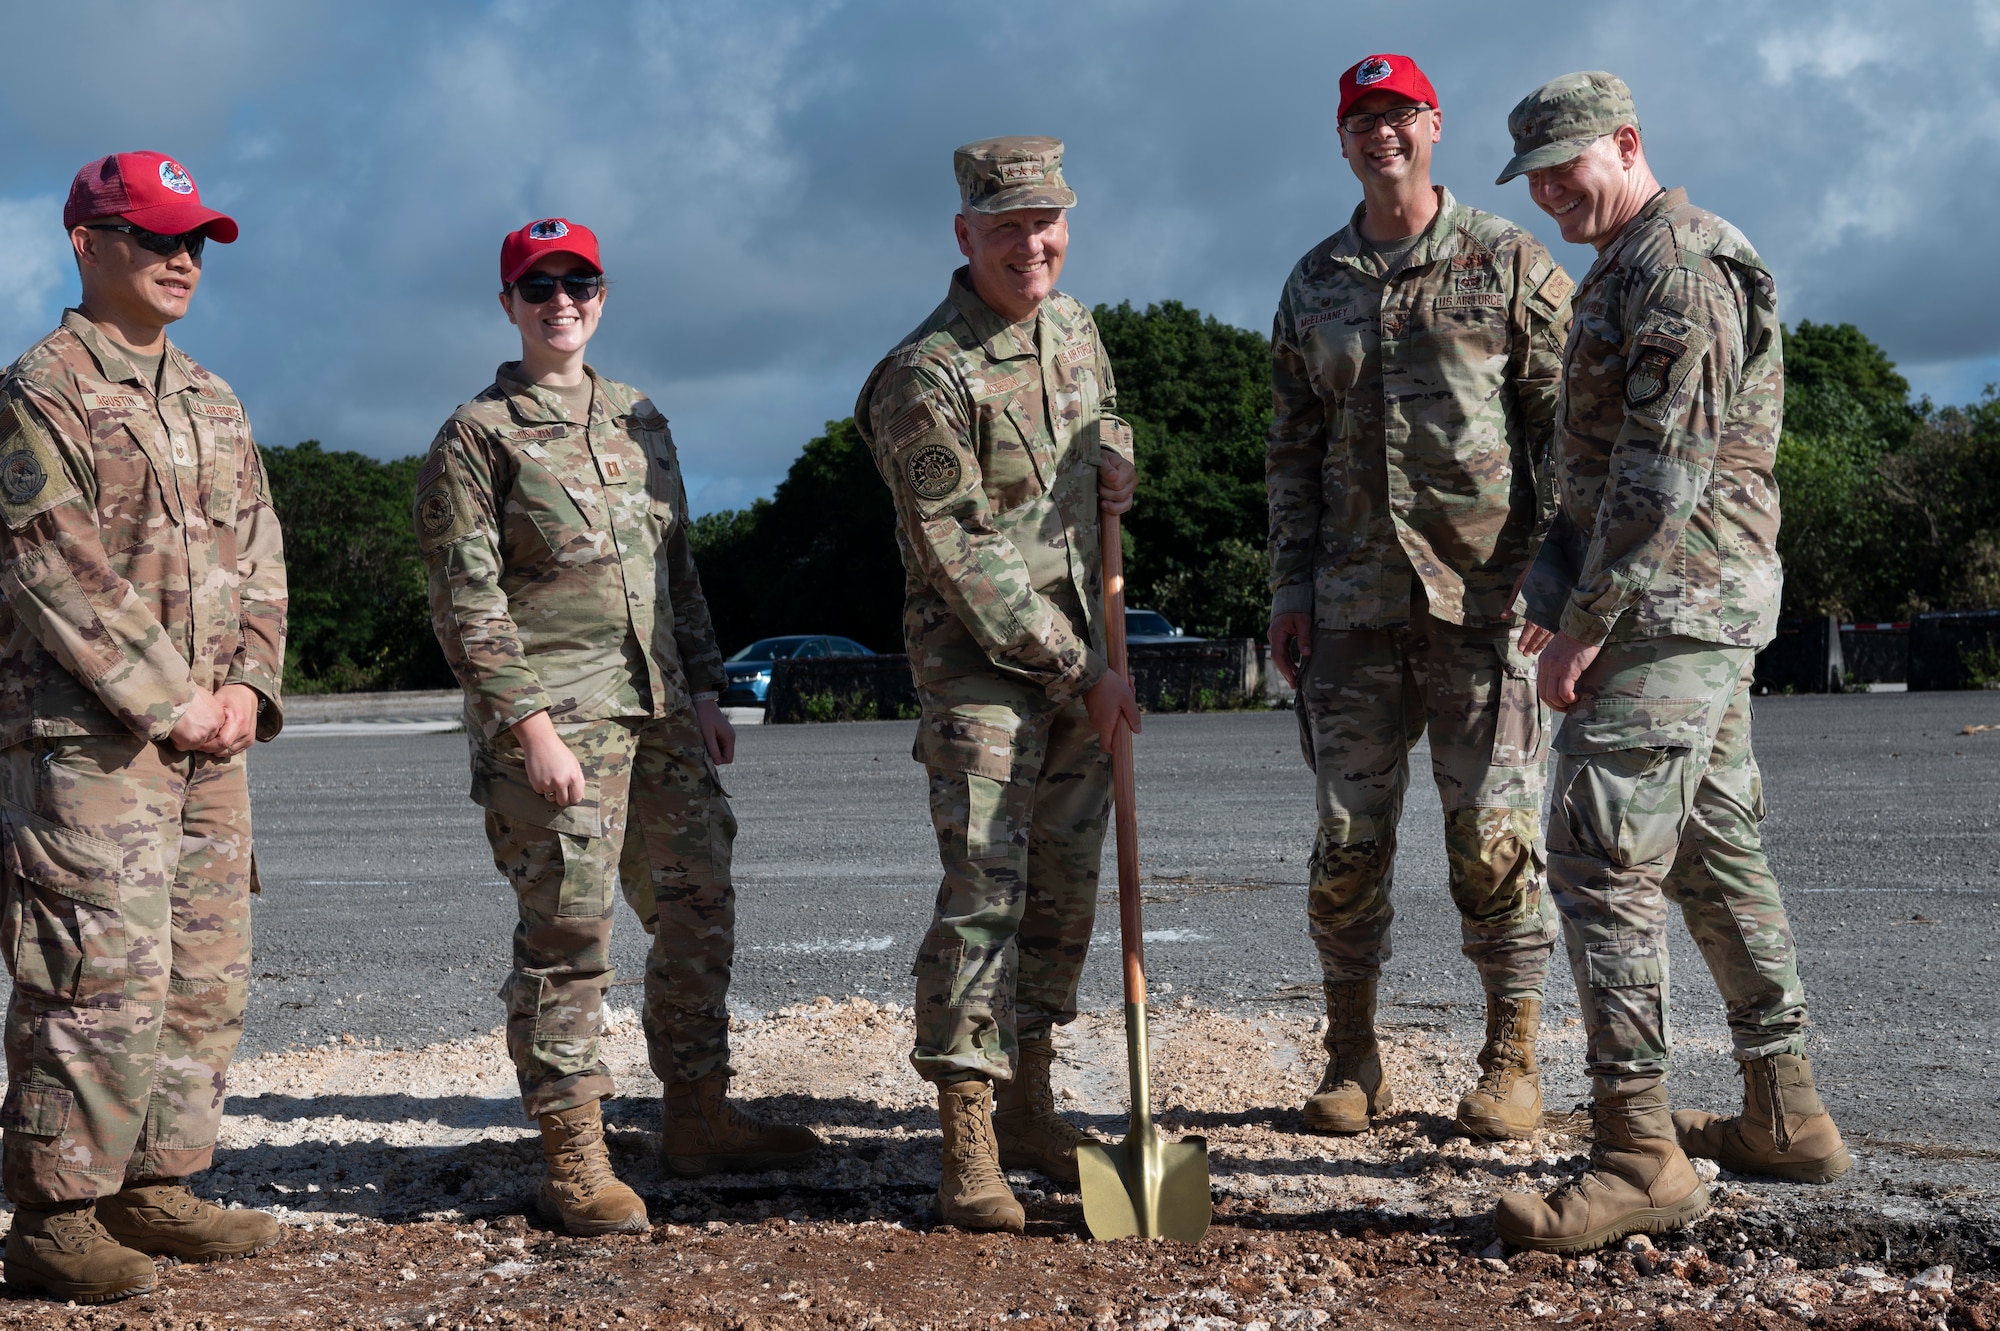 U.S. Air Force Lt. Gen. James Jacobson, Pacific Air Forces deputy commander, breaks ground on a construction site for the 554th Rapid Engineering Deployable Heavy Operations Repair Squadron Engineer at Pacific Regional Training Center, Andersen Air Force Base, Guam, Jan. 19, 2023. The 554th RED HORSE provides the Air Force with a mobile civil engineering response force in support of contingency and special operations worldwide. (U.S. Air Force photo by Airman 1st Class Spencer Perkins)